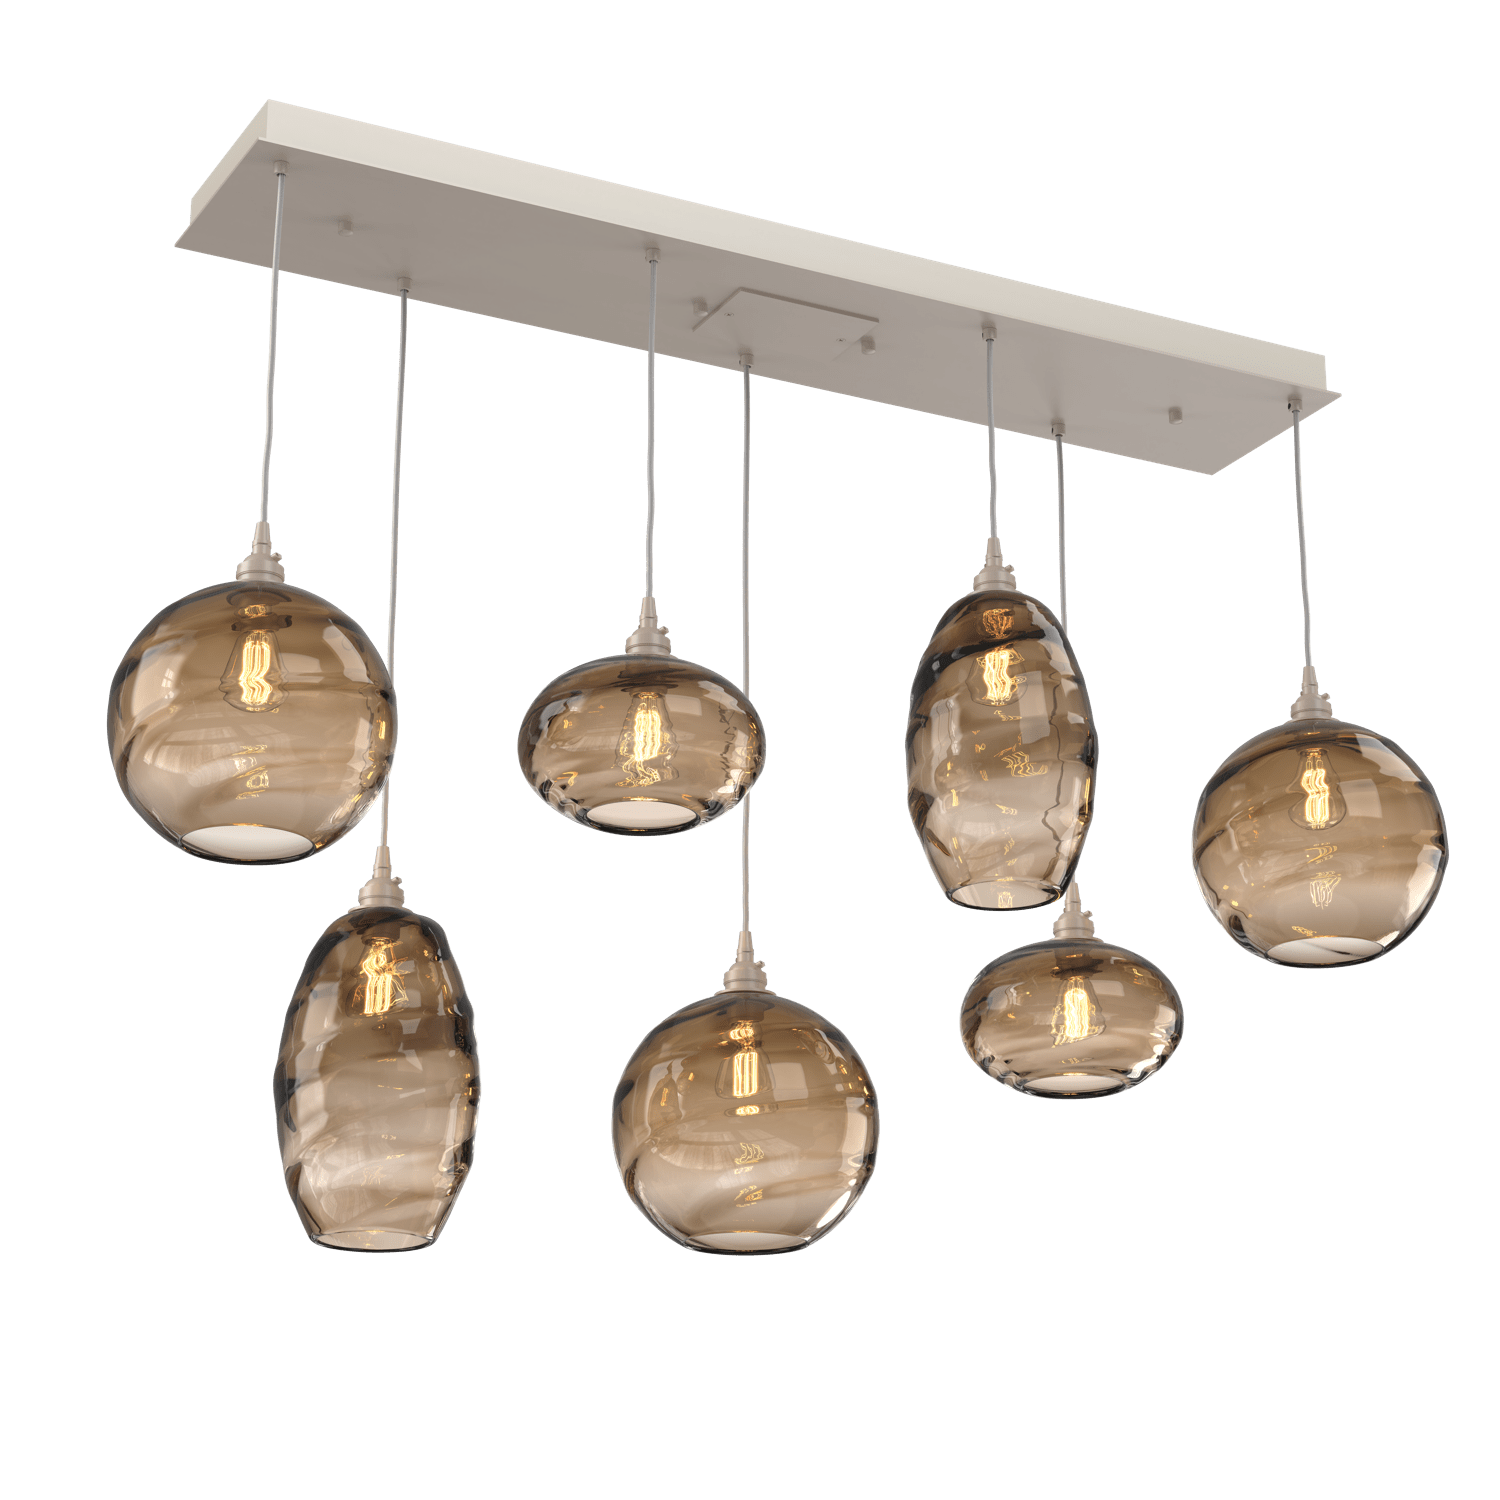 PLB0048-07-BS-OB-Hammerton-Studio-Optic-Blown-Glass-Misto-7-light-linear-pendant-chandelier-with-metallic-beige-silver-finish-and-optic-bronze-blown-glass-shades-and-incandescent-lamping